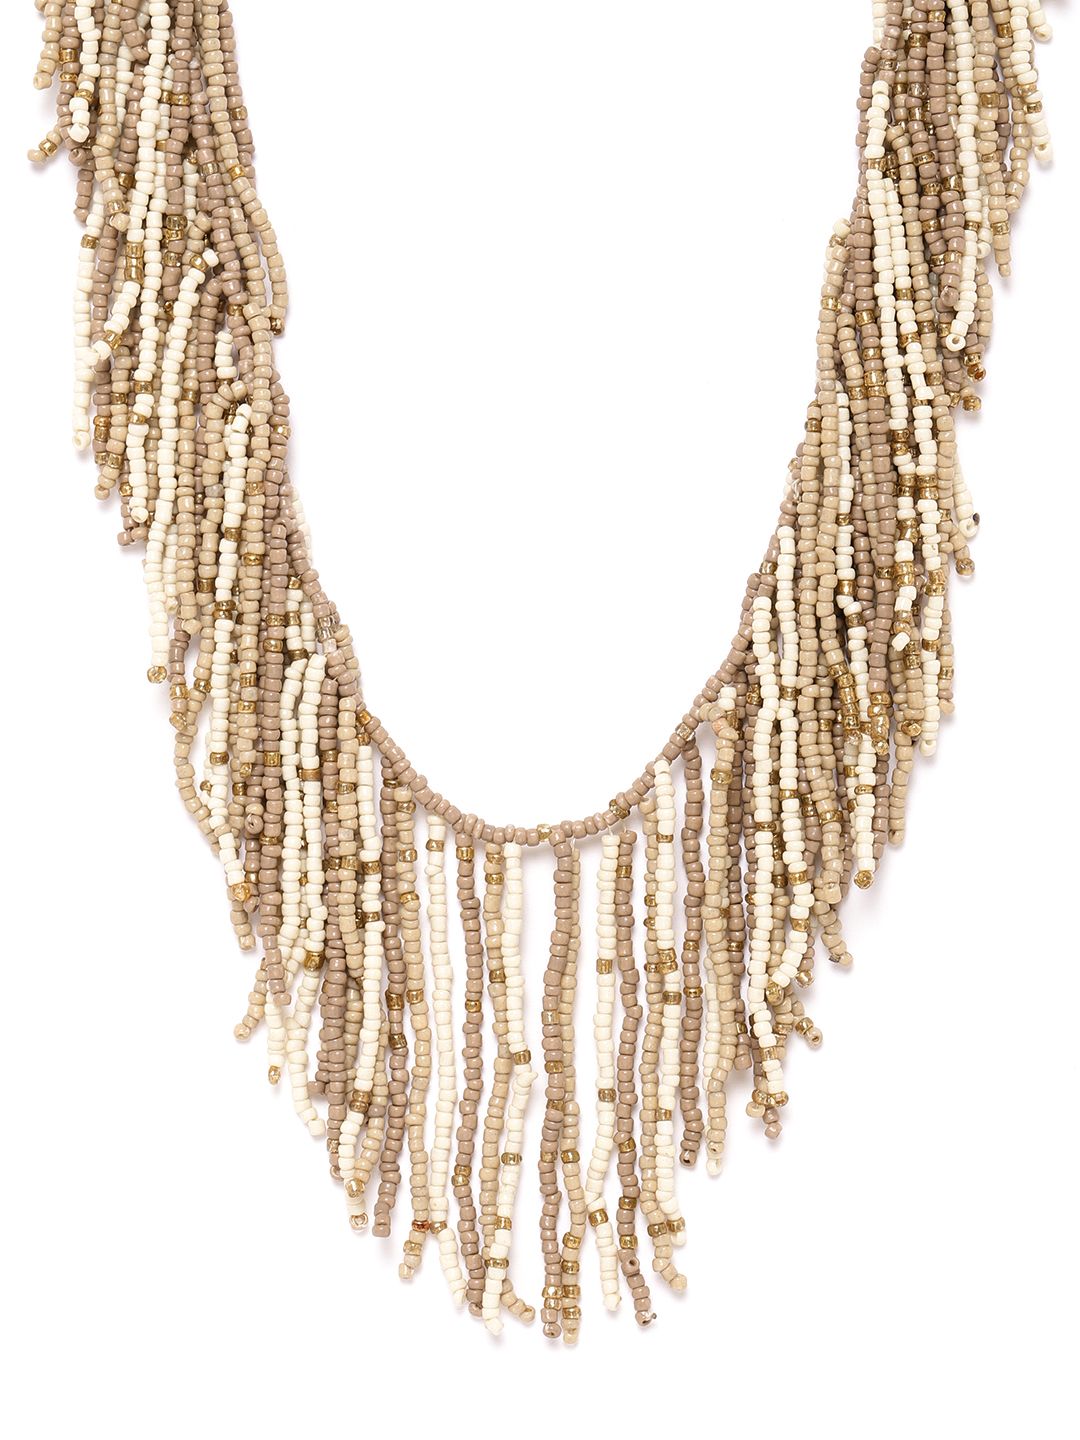 RICHEERA Beige & Off-White Gold-Plated Beaded Tasselled Necklace Price in India